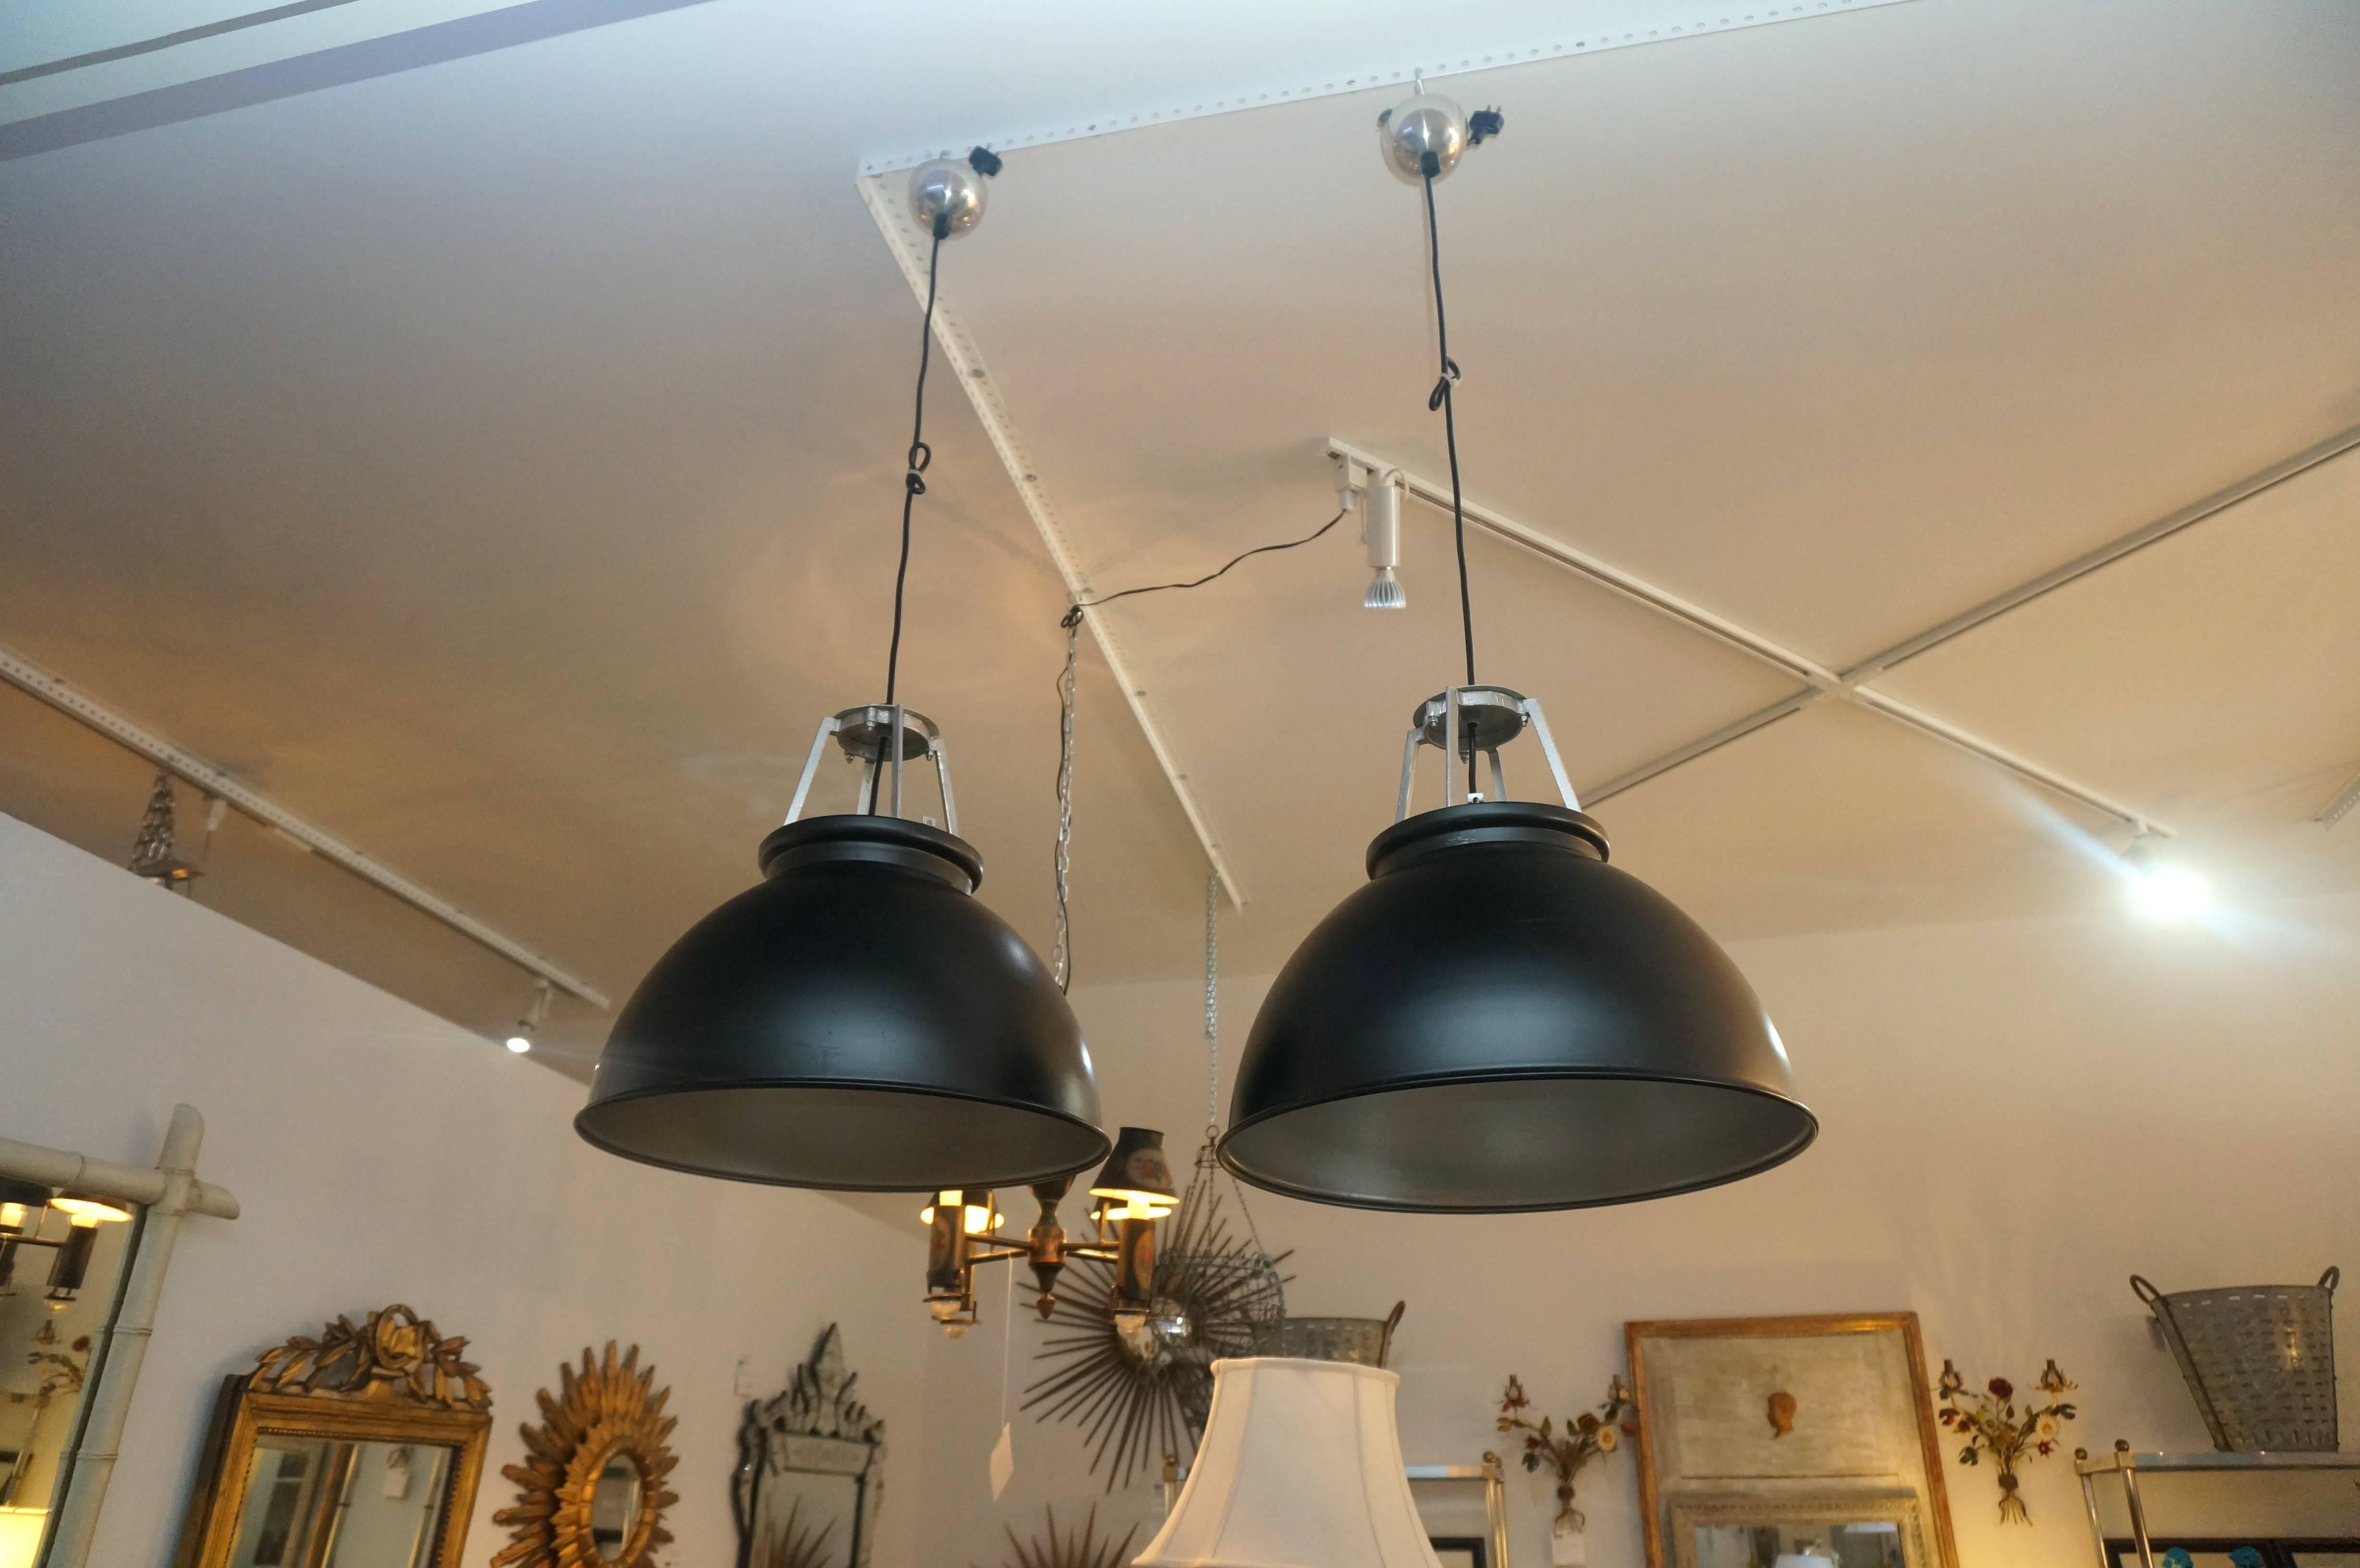 This pair of 1940s industrial style light fixtures were purchased in London (originated in France) and have been professionally restored with new wiring and paint. The exterior is a dark black with soft-silver/aluminum painted accents.

Note: The